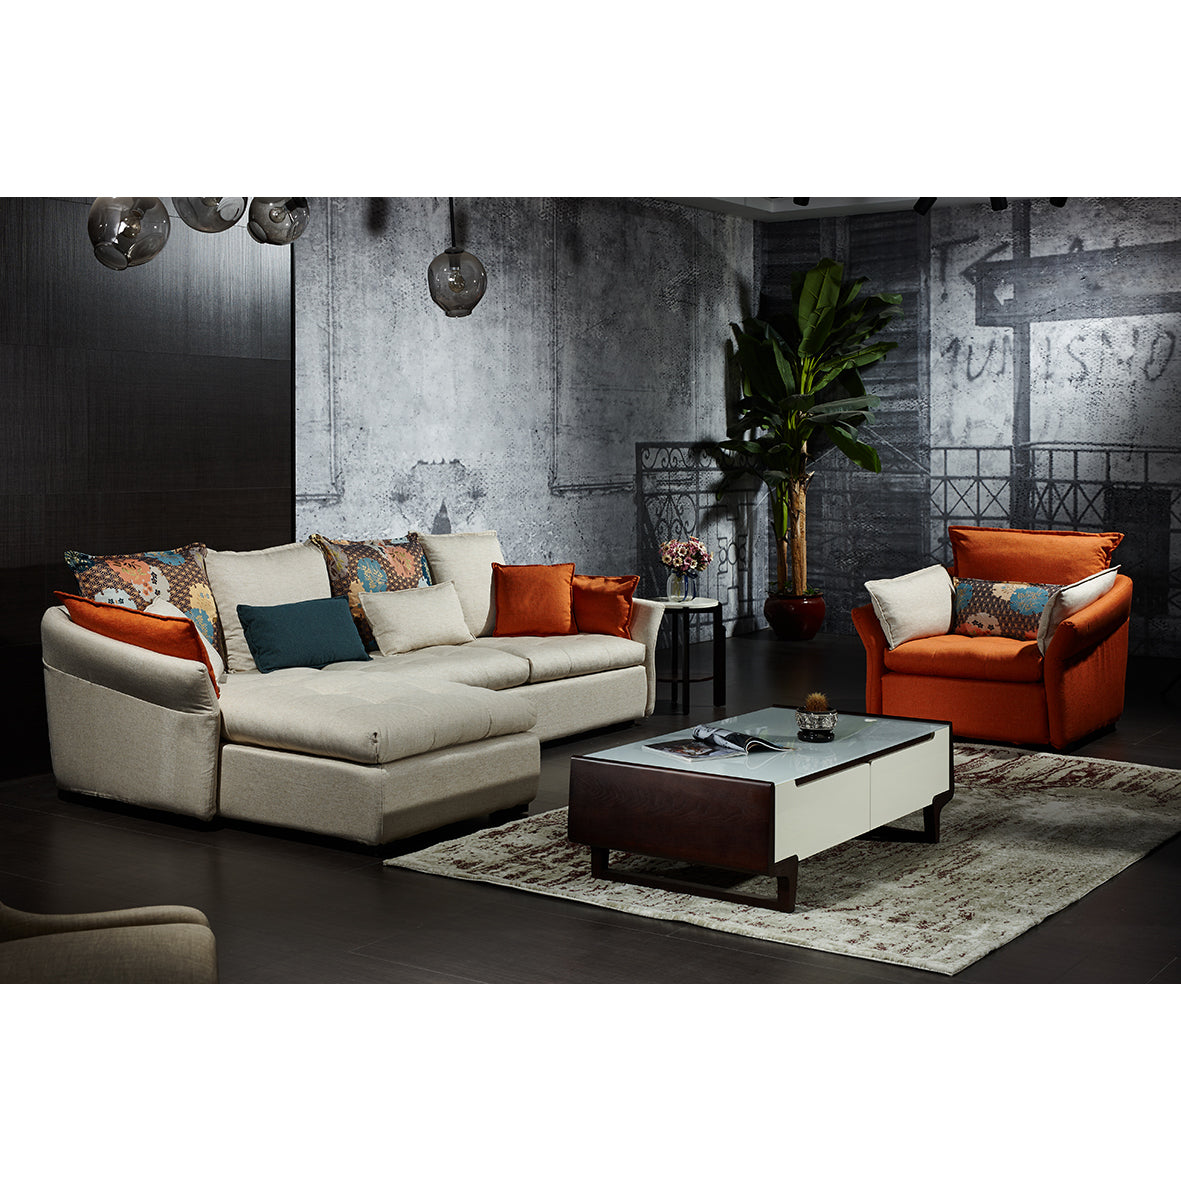 L-Shape Couch with Orange Armchair